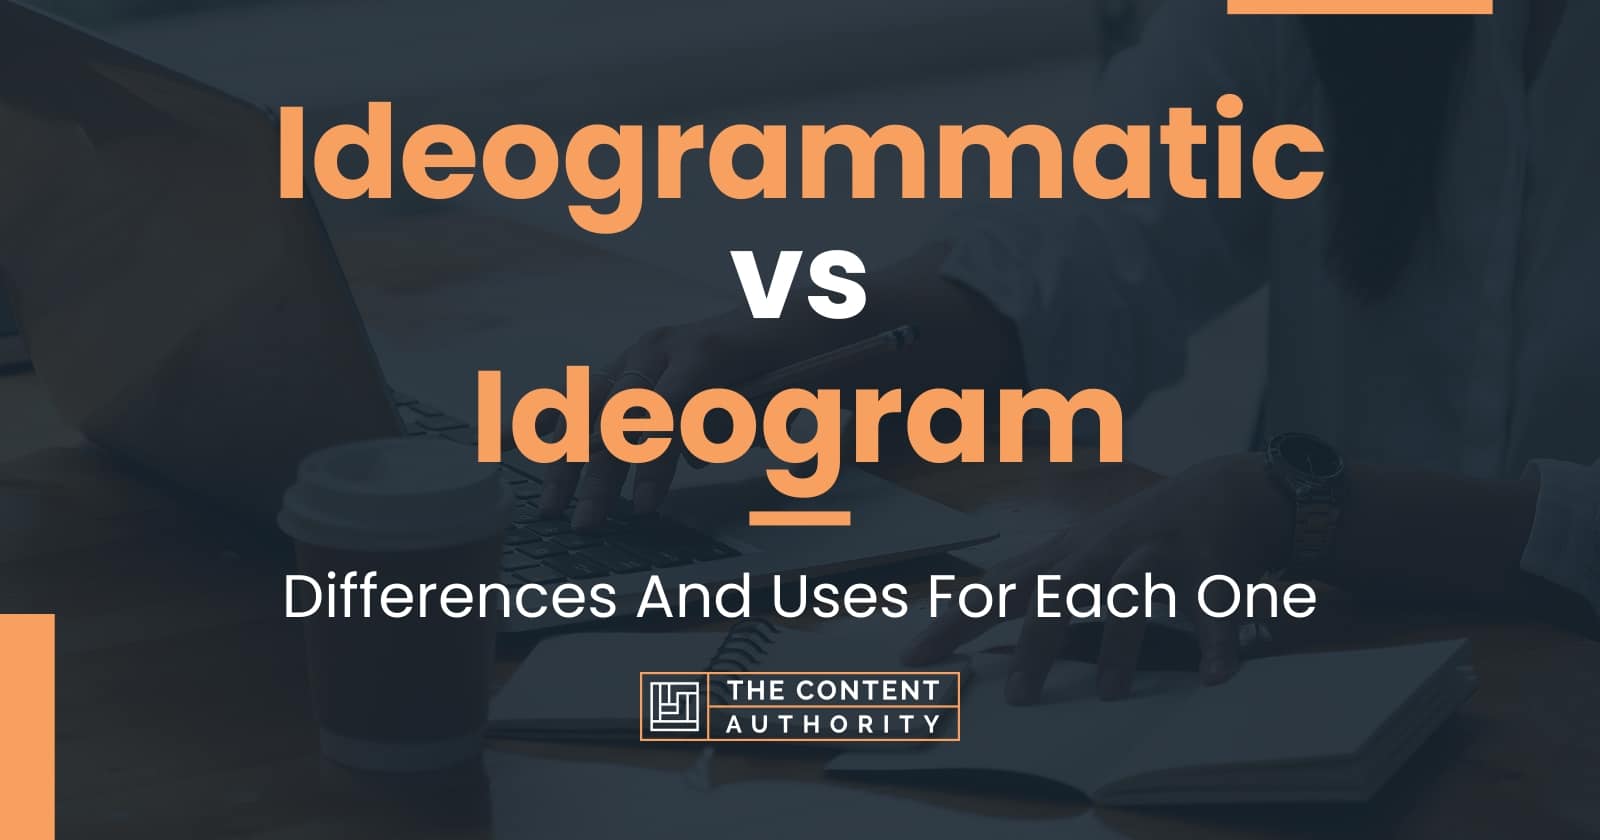 Ideogrammatic vs Ideogram: Differences And Uses For Each One